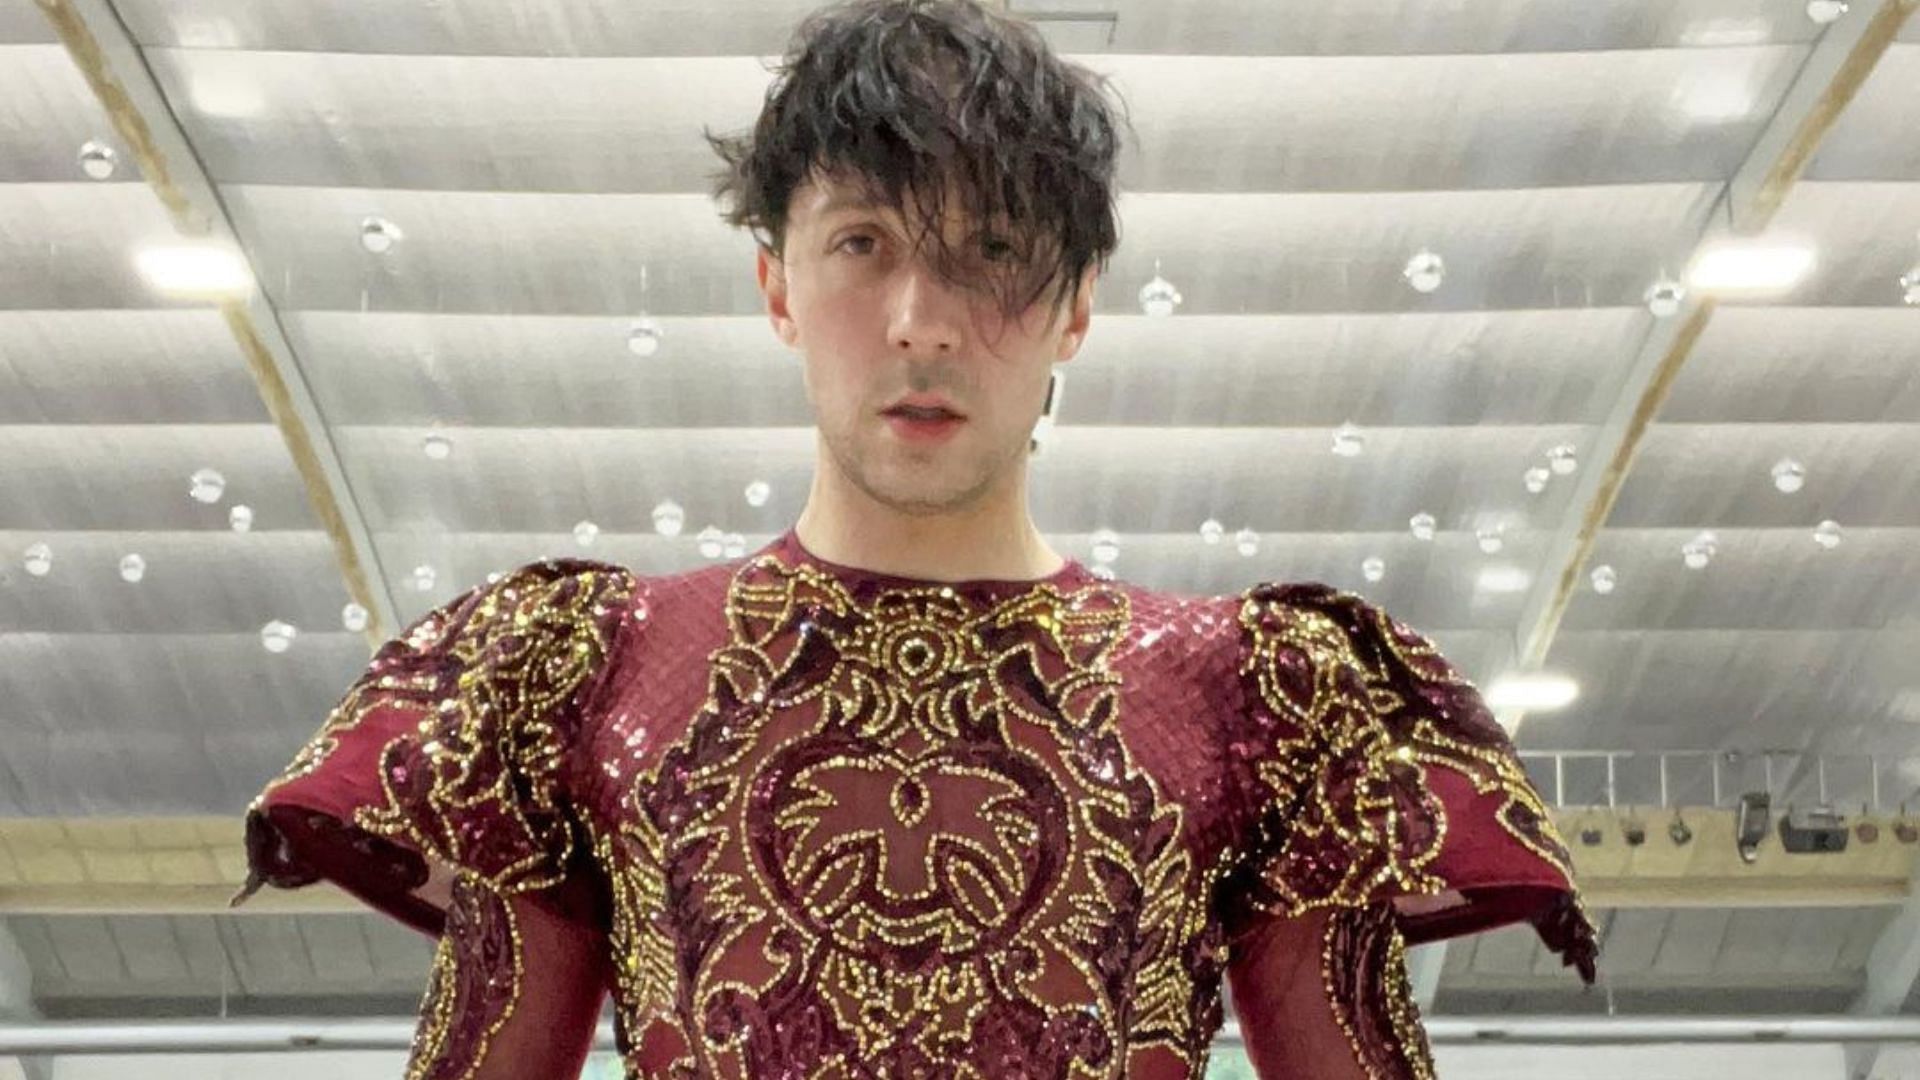 Olympian Johnny Weir to appear on Criss Angel